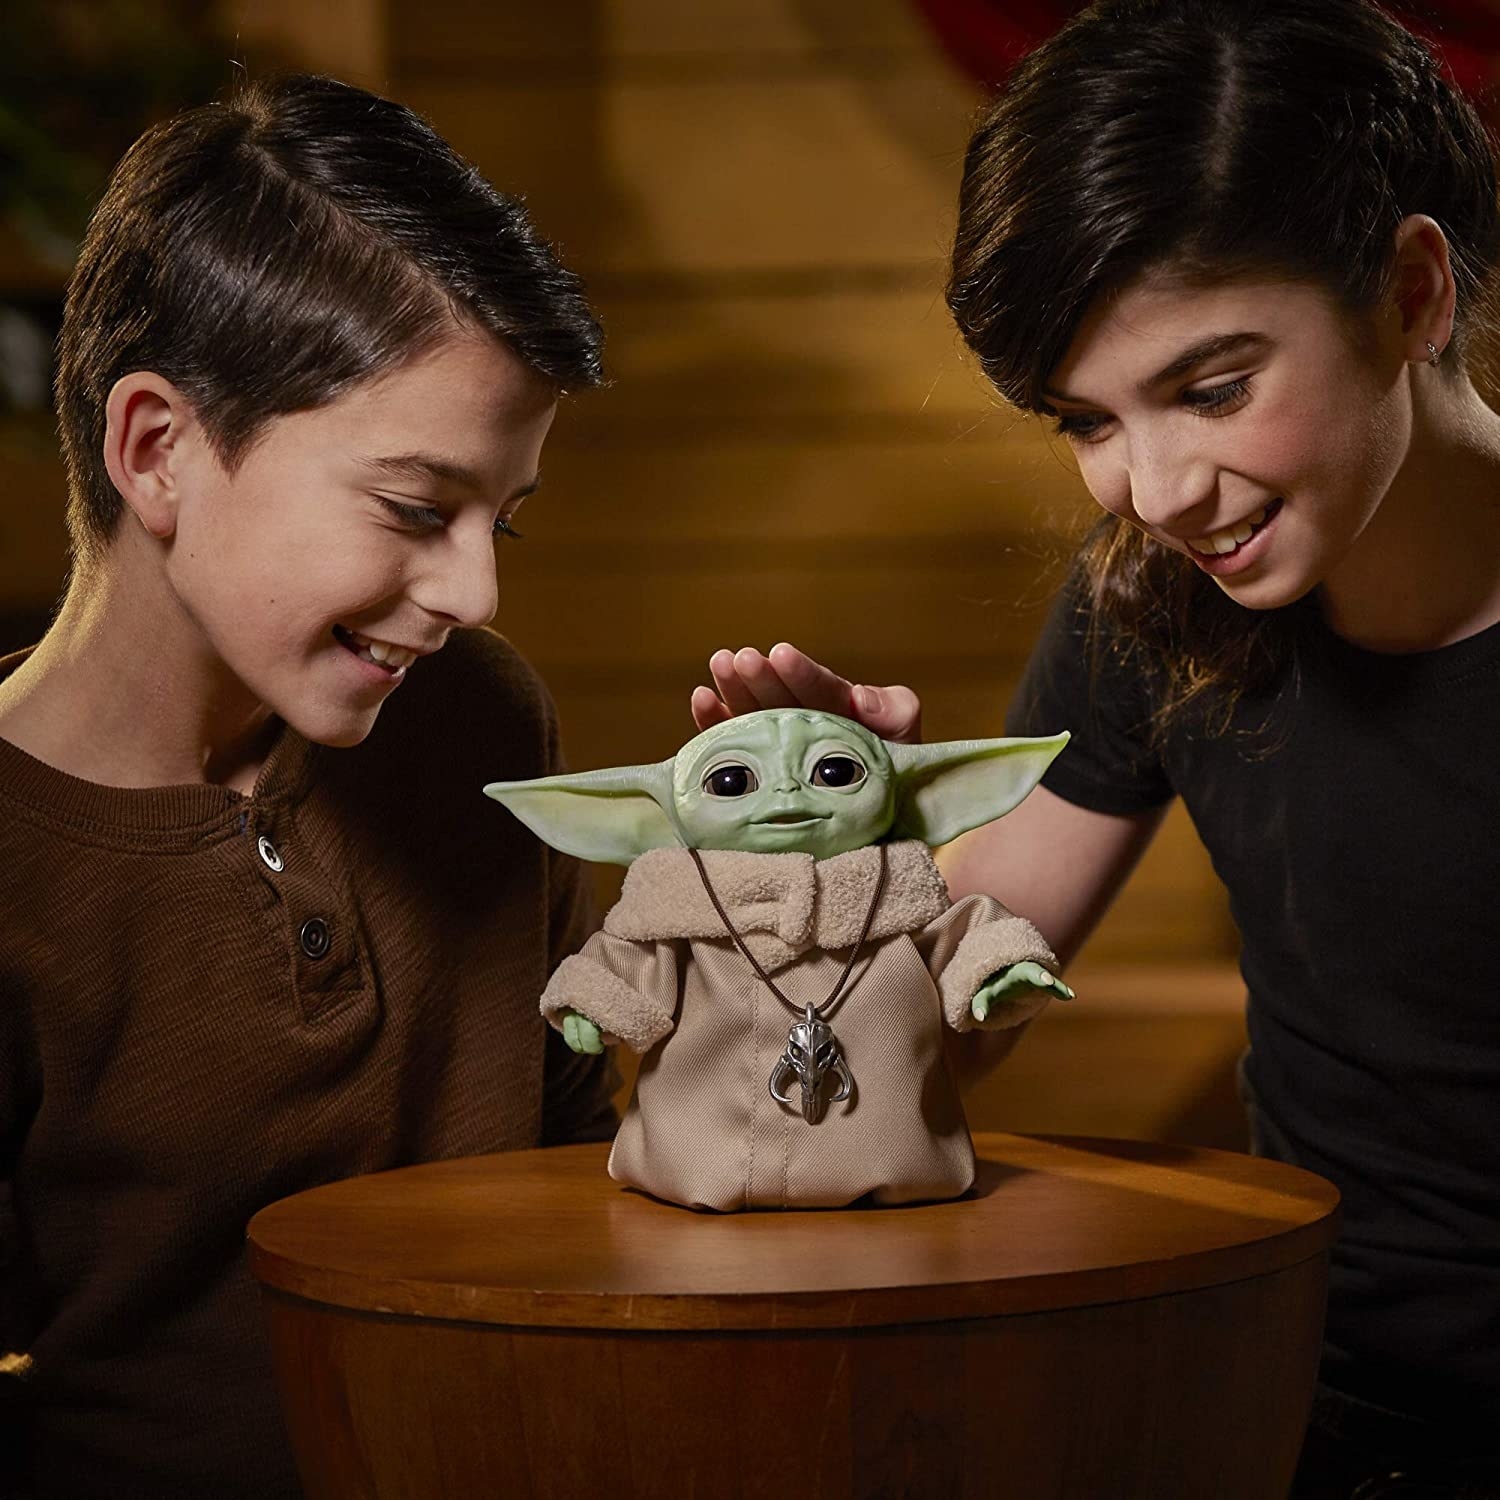 Two people patting the Yoda doll on the head